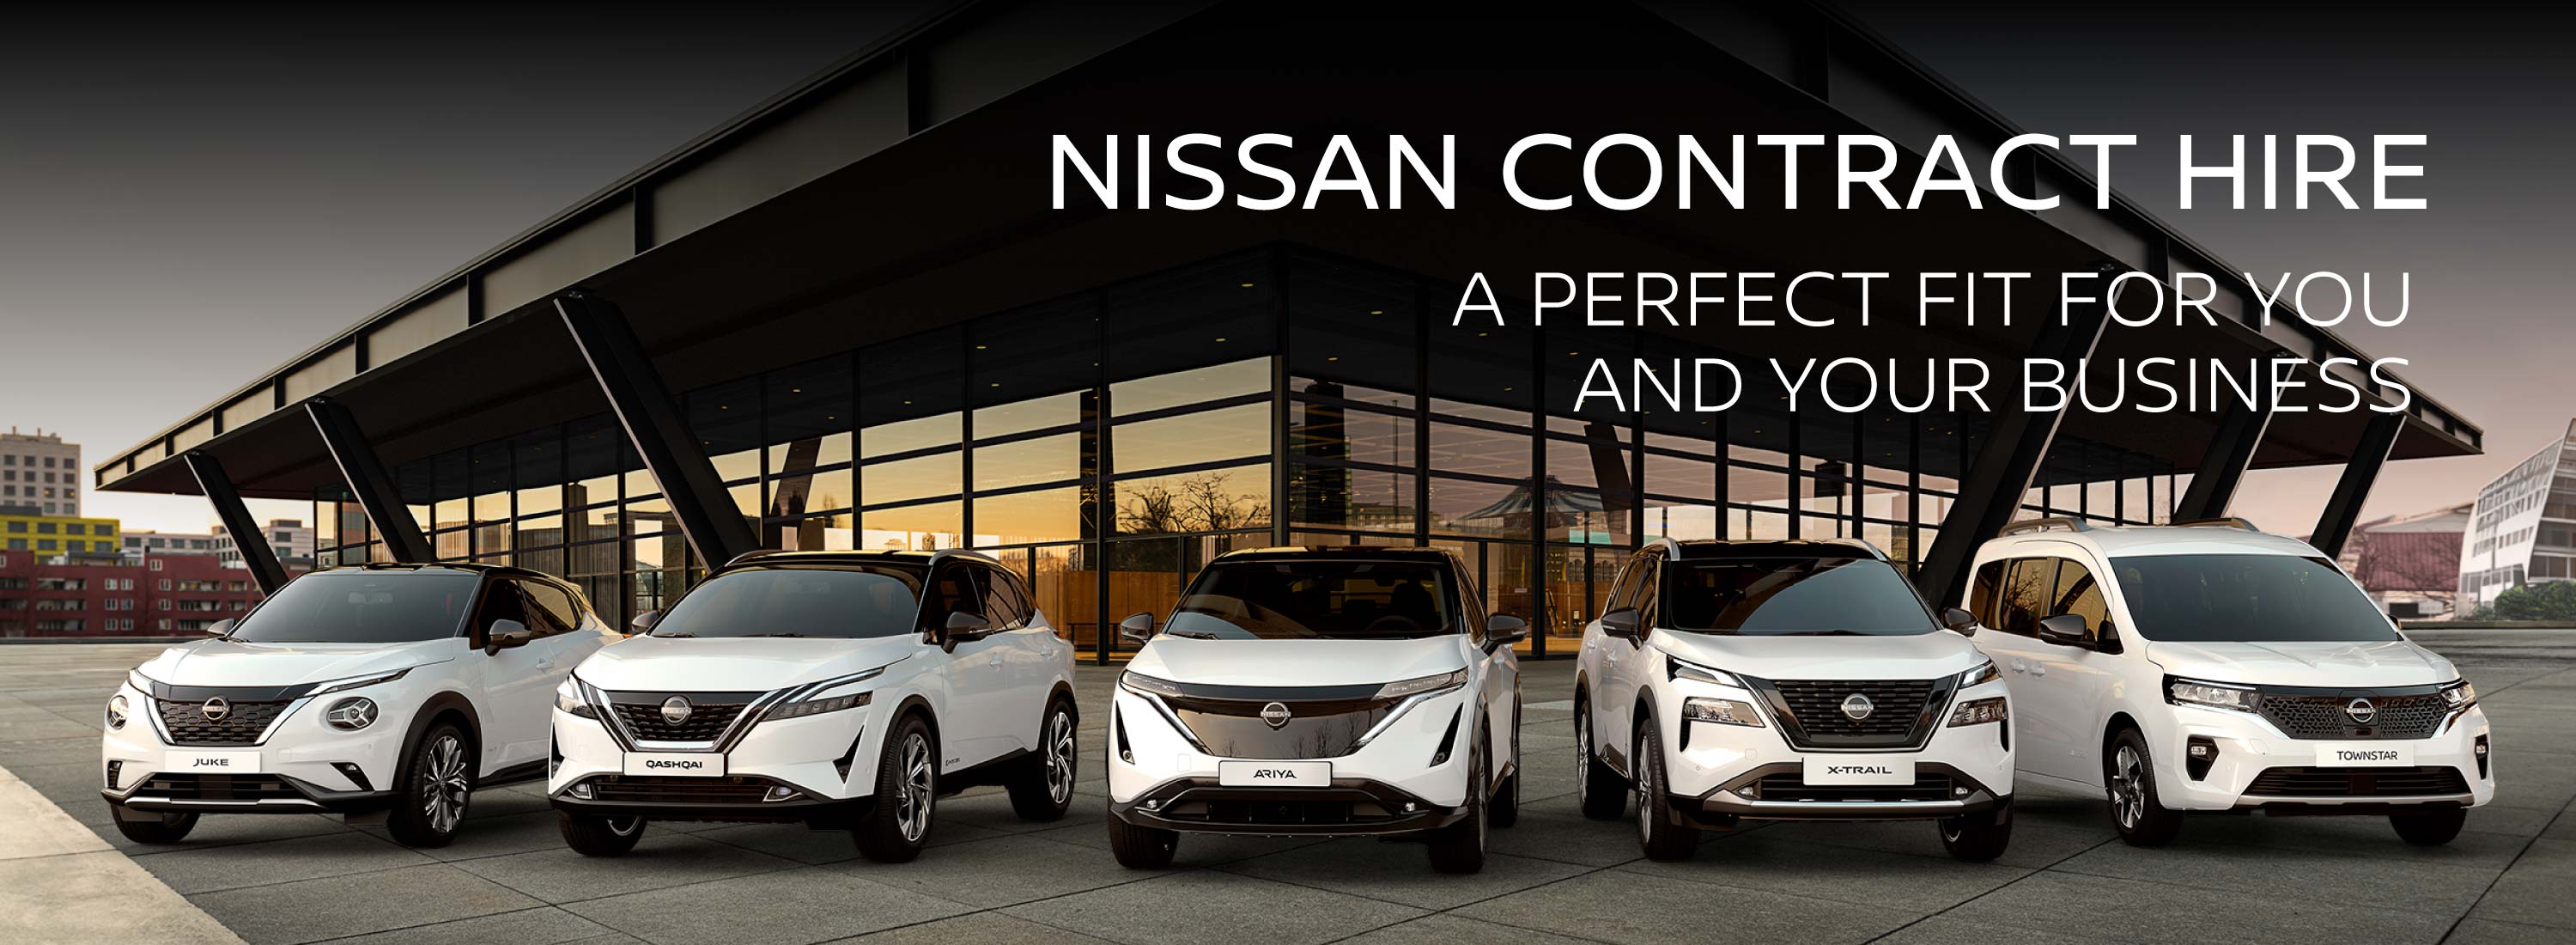 150623 Nissan Contract Hire Banner